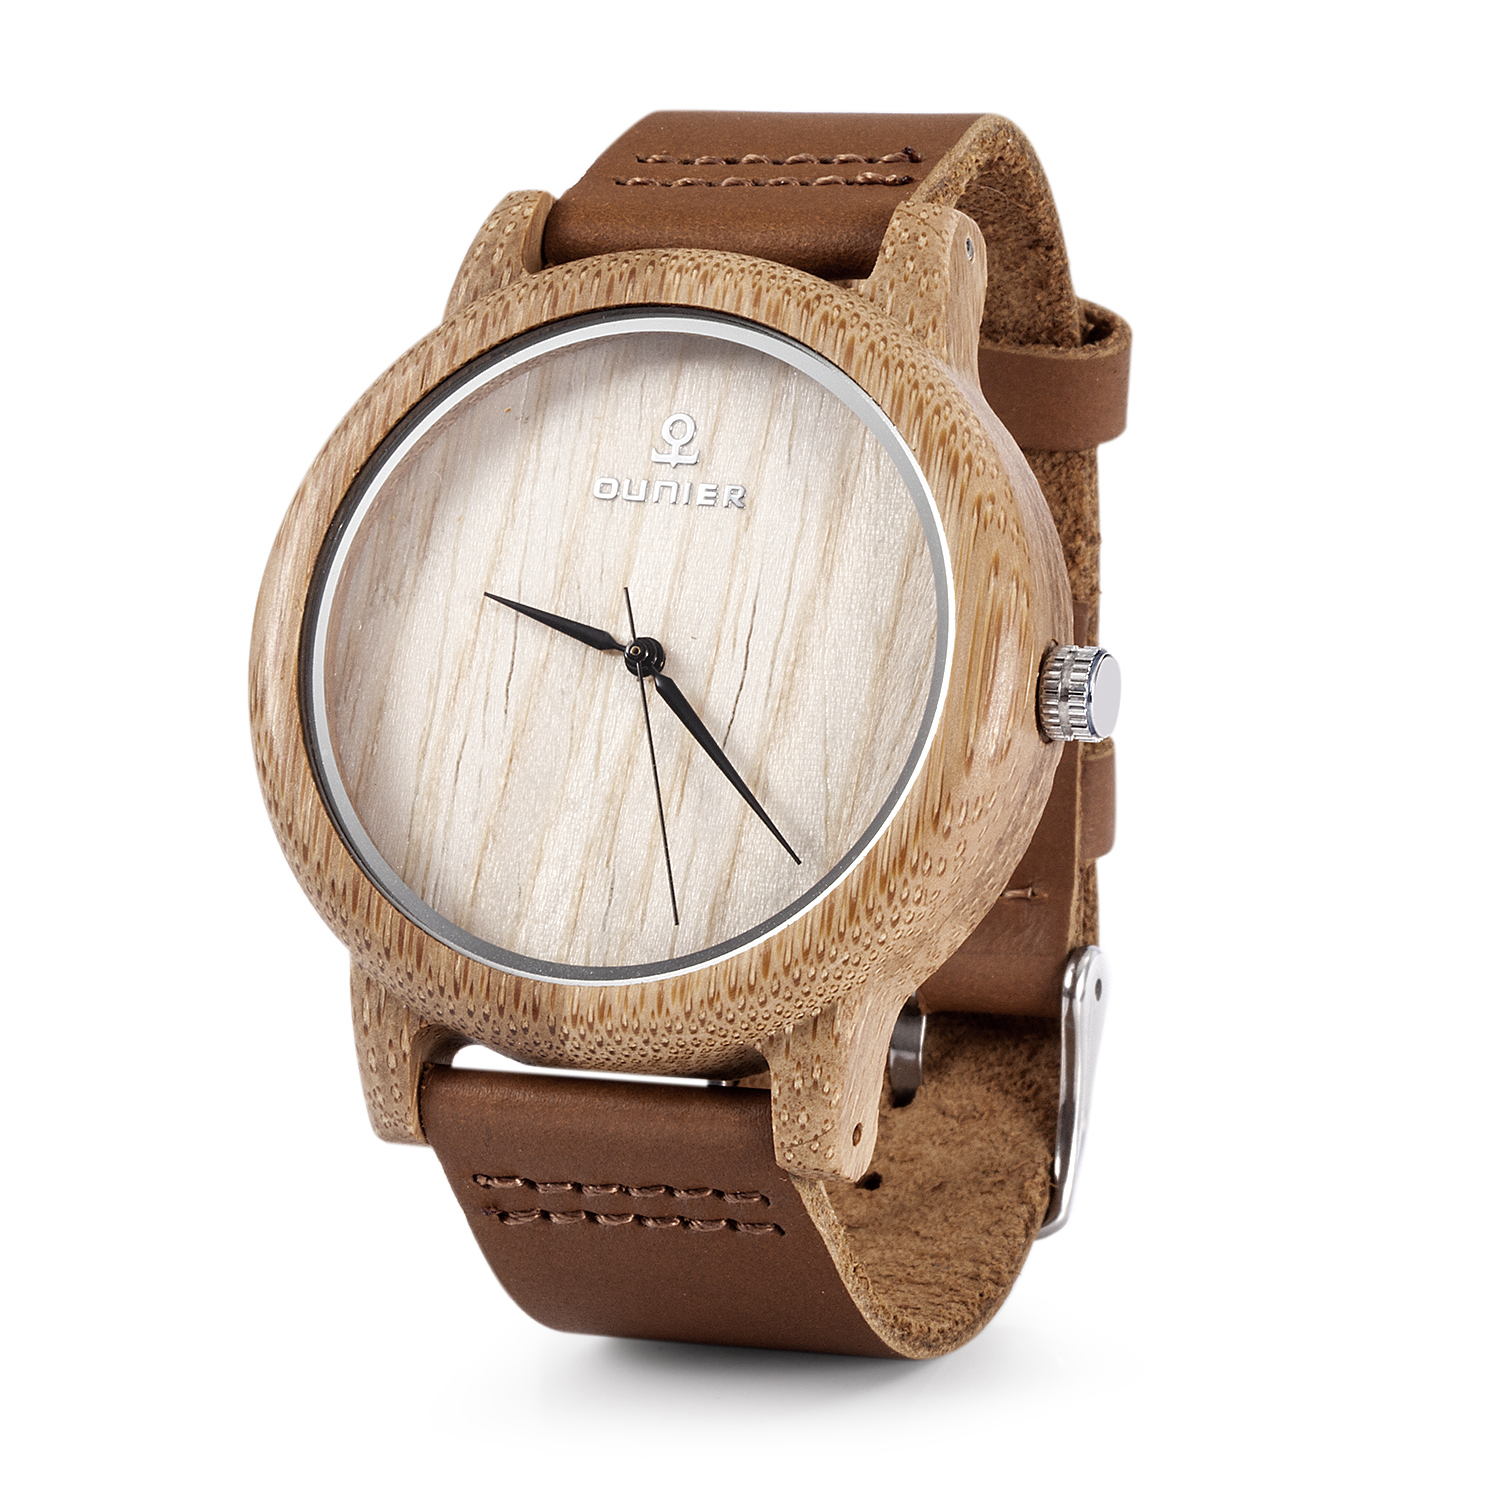 Bamboo case watch with leather band